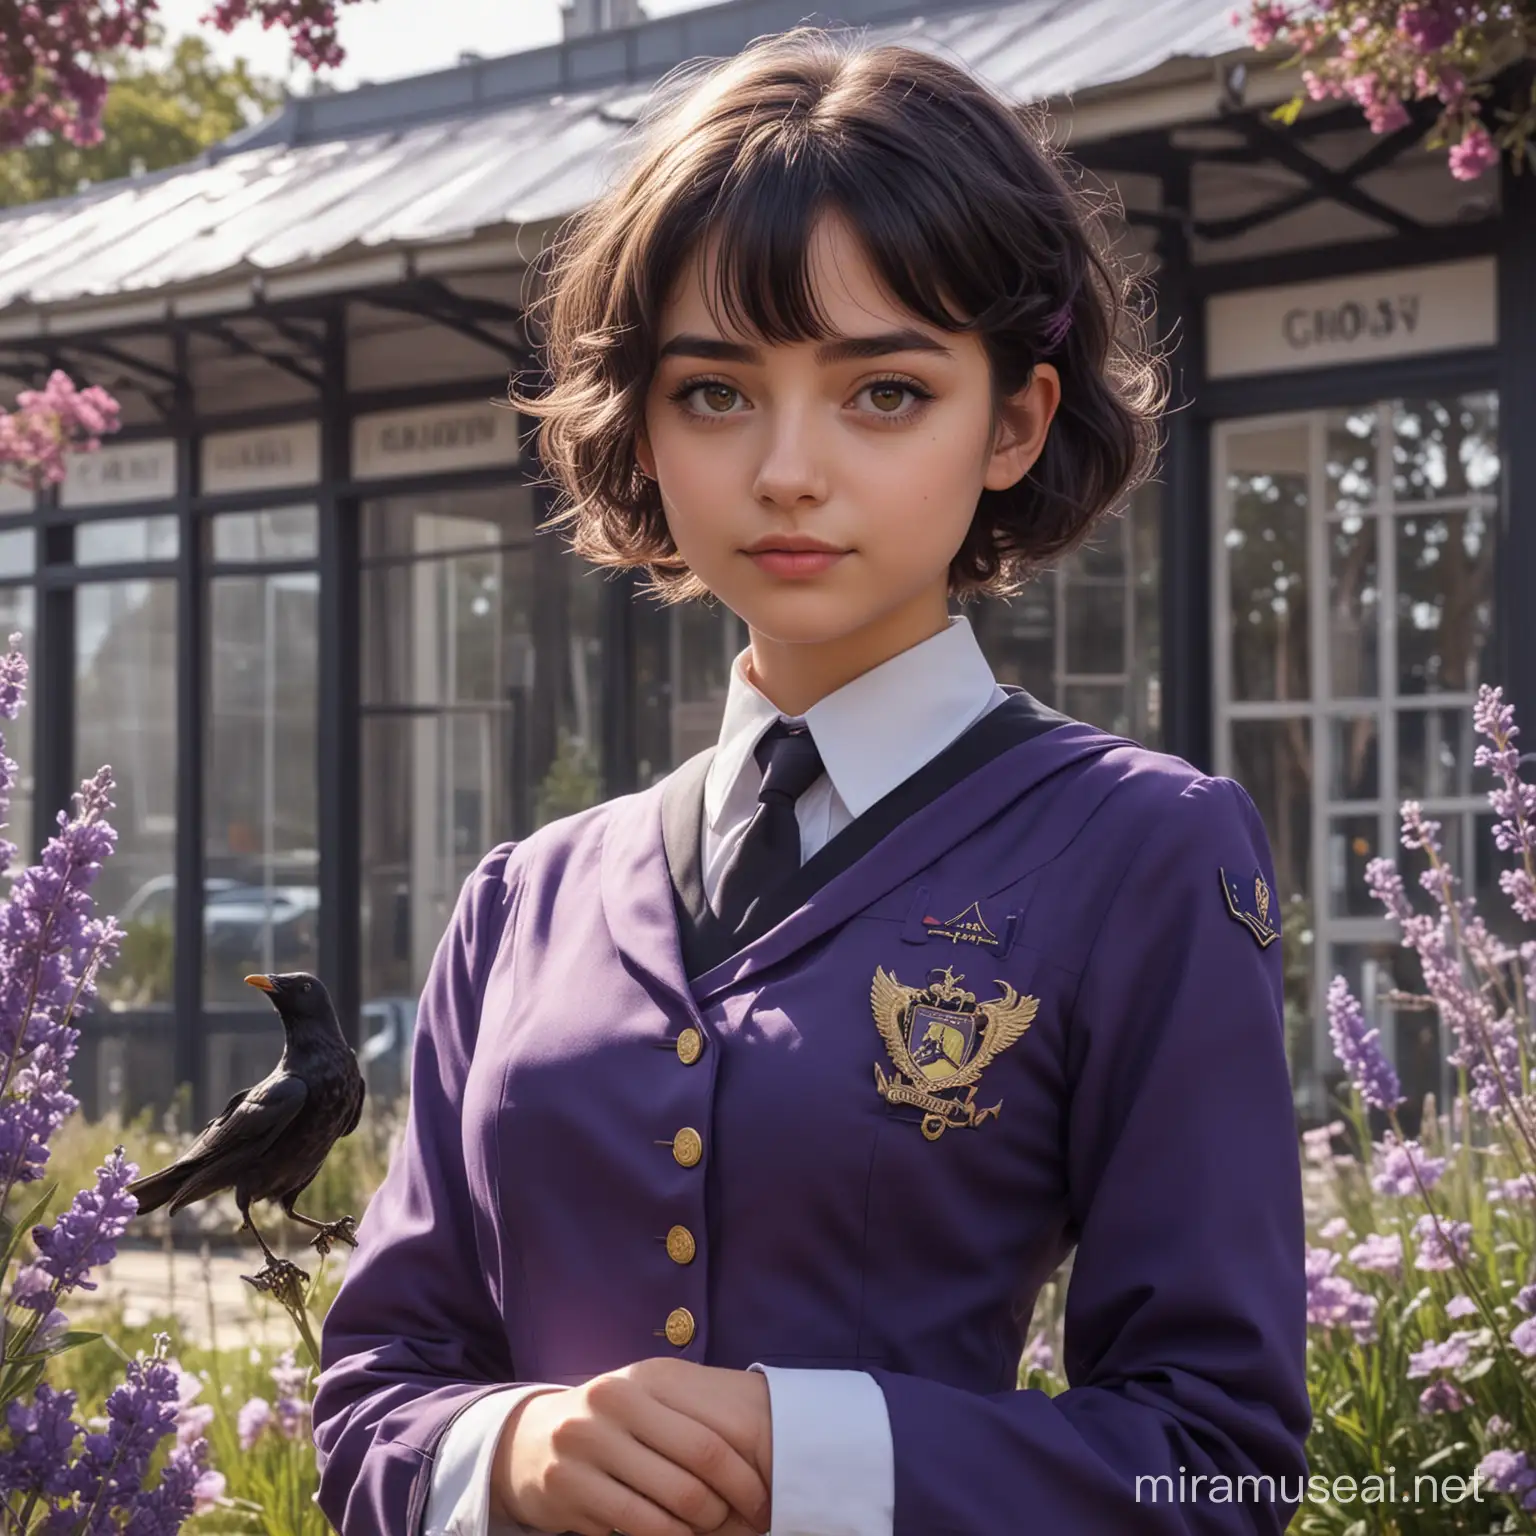 a girl, reader, wears a lavander school uniform, have gold badge in uniform, short hair, wavy hair, dark violet hair, shy personality, expressive eyes,  glass pavillion as background, flowers and crows, dawn view, university, whole body dress uniform